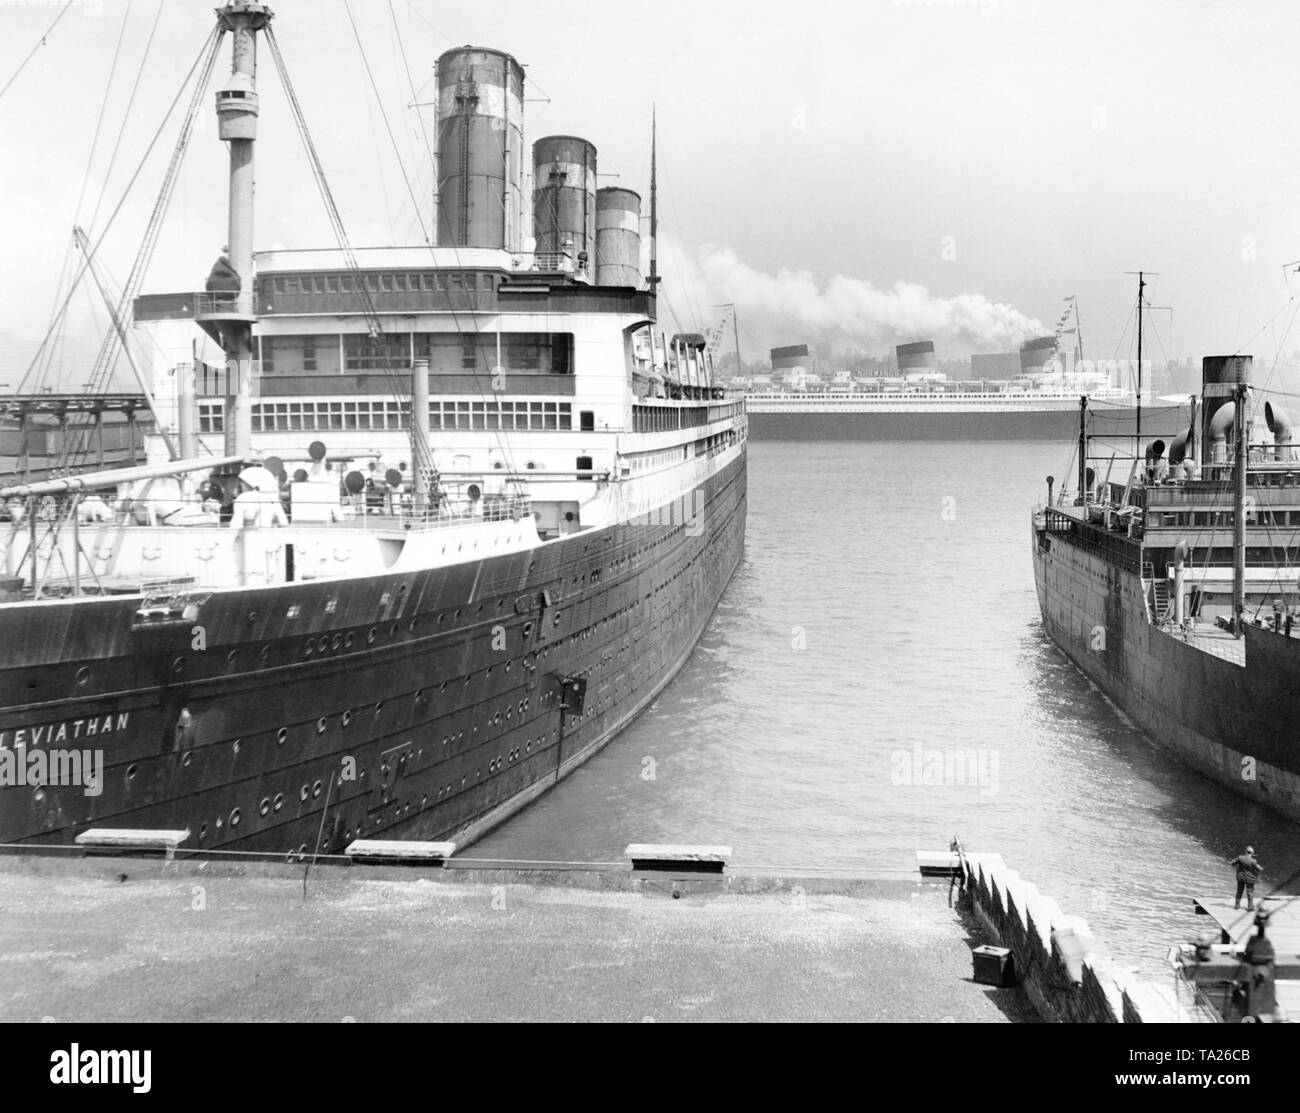 The French ocean liner 'Normandie' passes by the berth of 'Leviathan' in New York City. Both liners were the biggest ships in the world at the time of their entry into service. Stock Photo